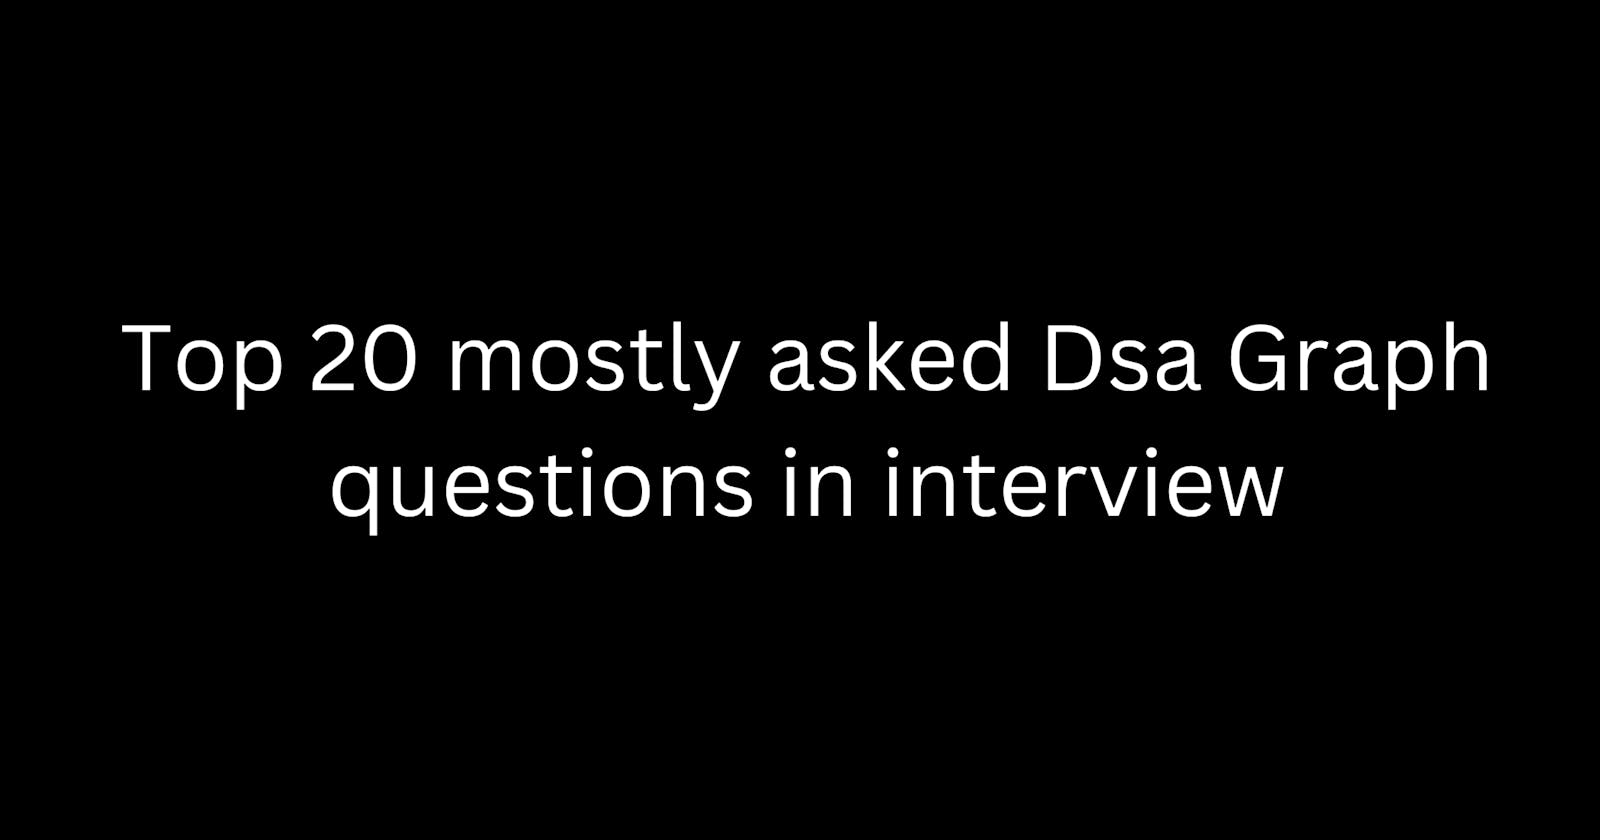 Top 20 mostly asked Dsa Graph questions in interview